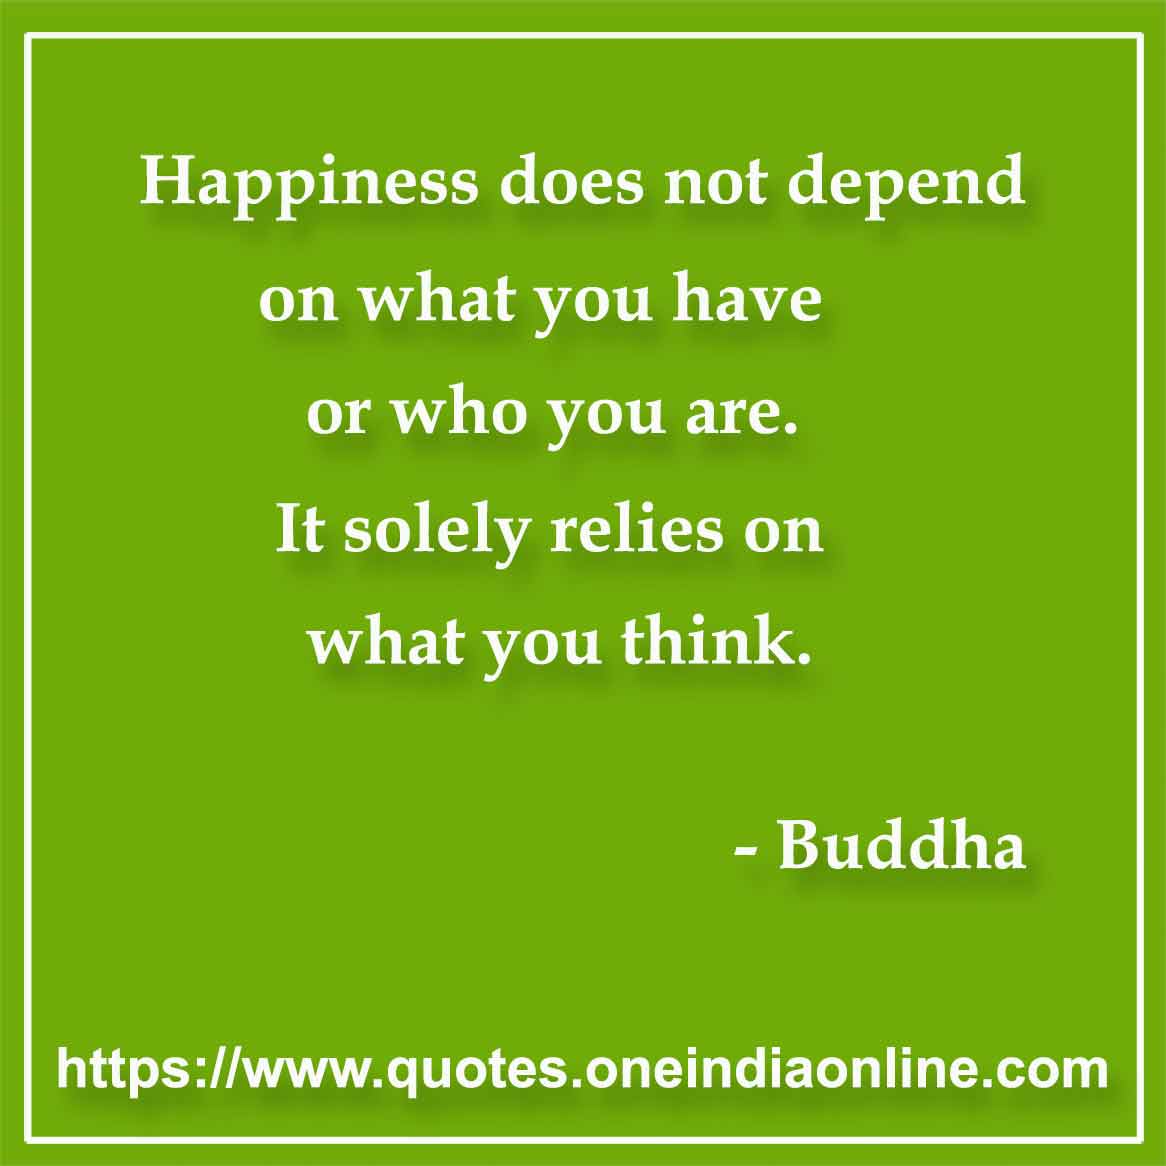 Famous Buddha Quotes in English Sayings and Quotations